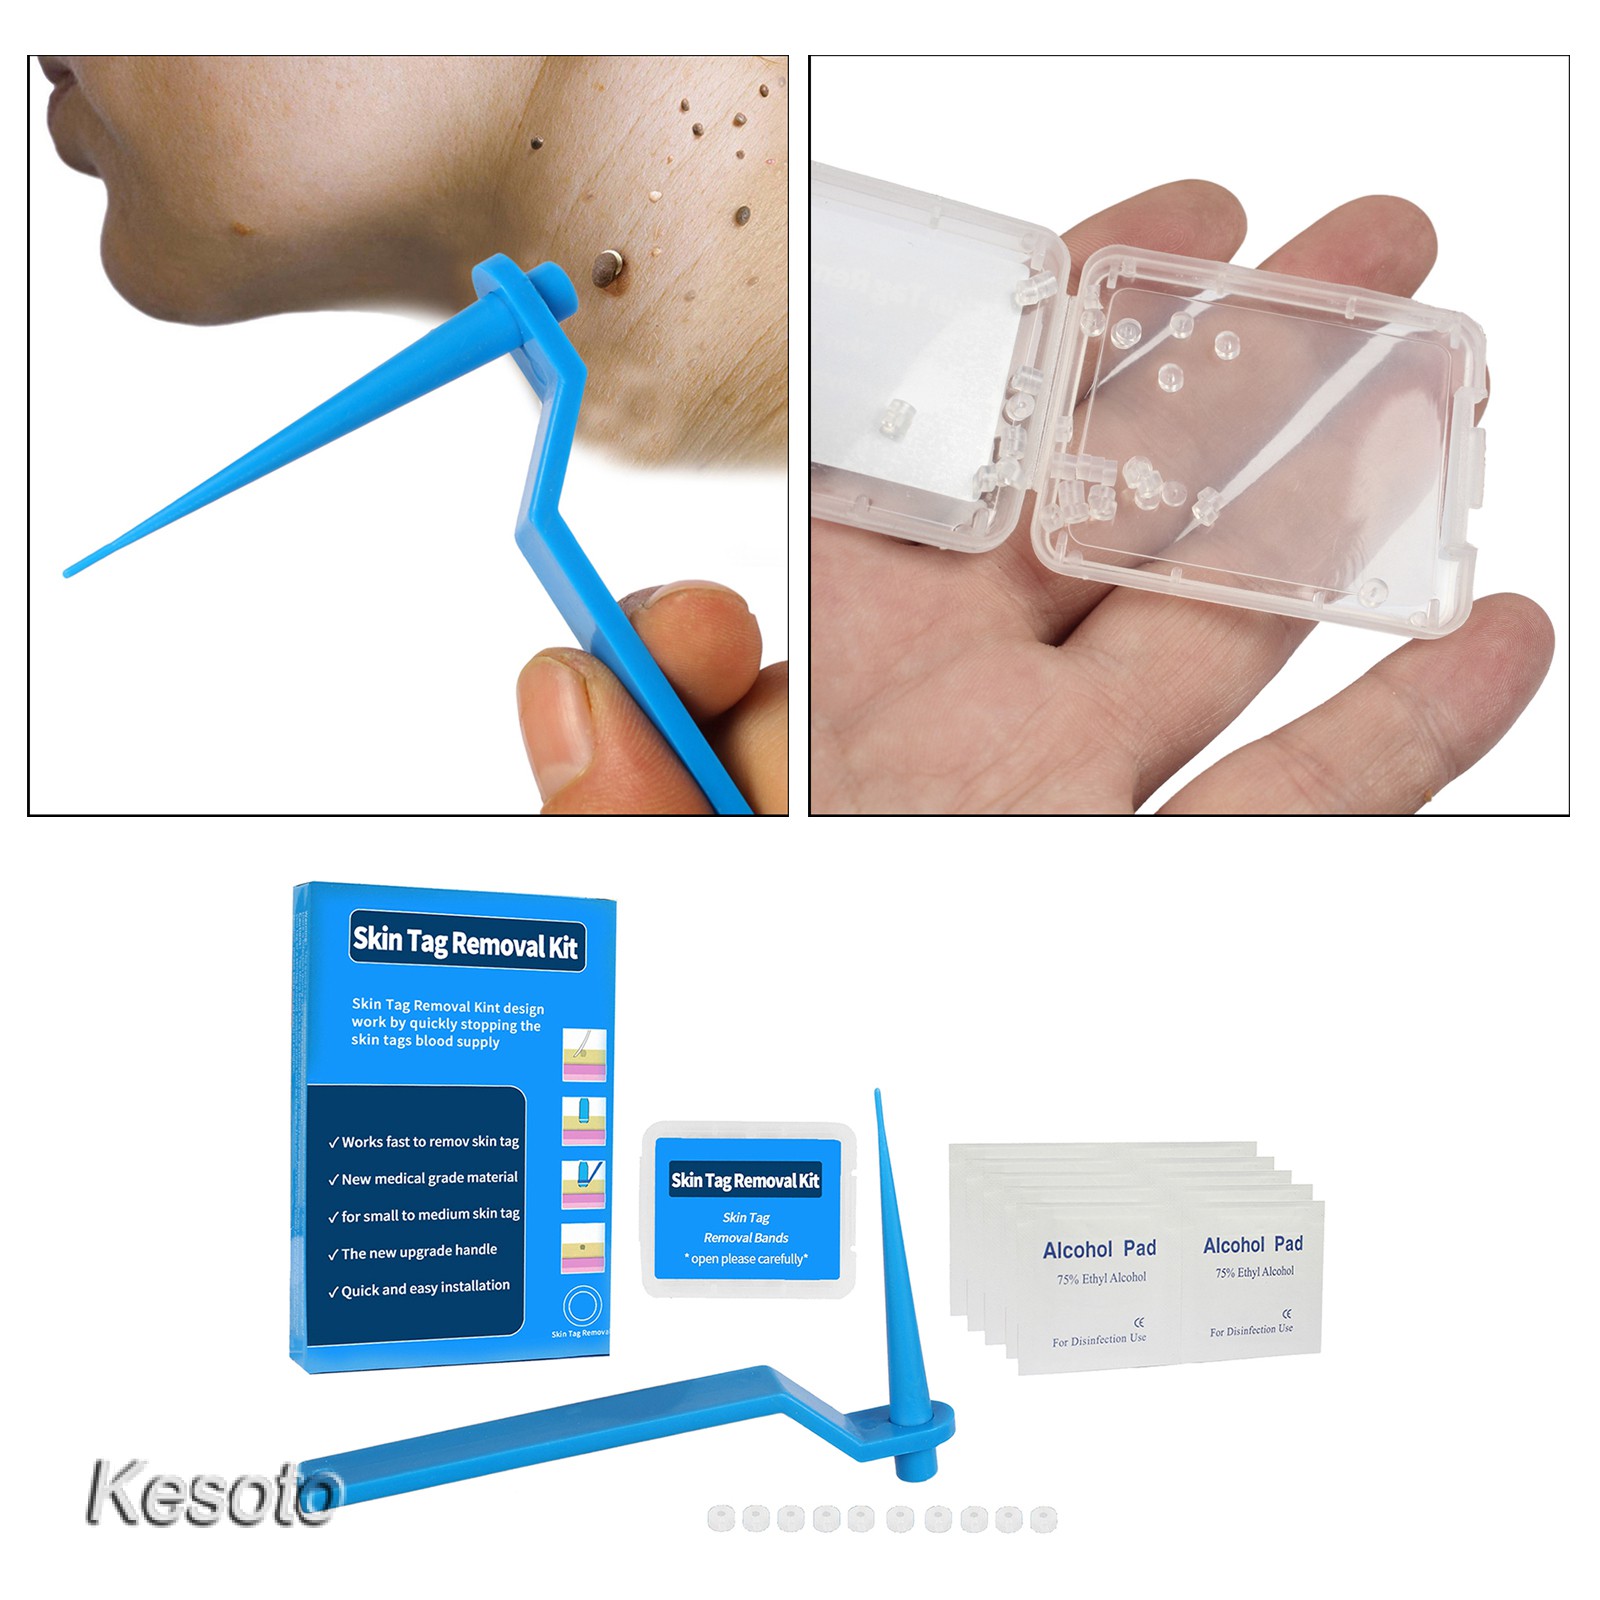 [kesoto] Skin Tag Kill Skin Mole Wart Remover Band Skin Tag Removal Kit With Cleansing Pads